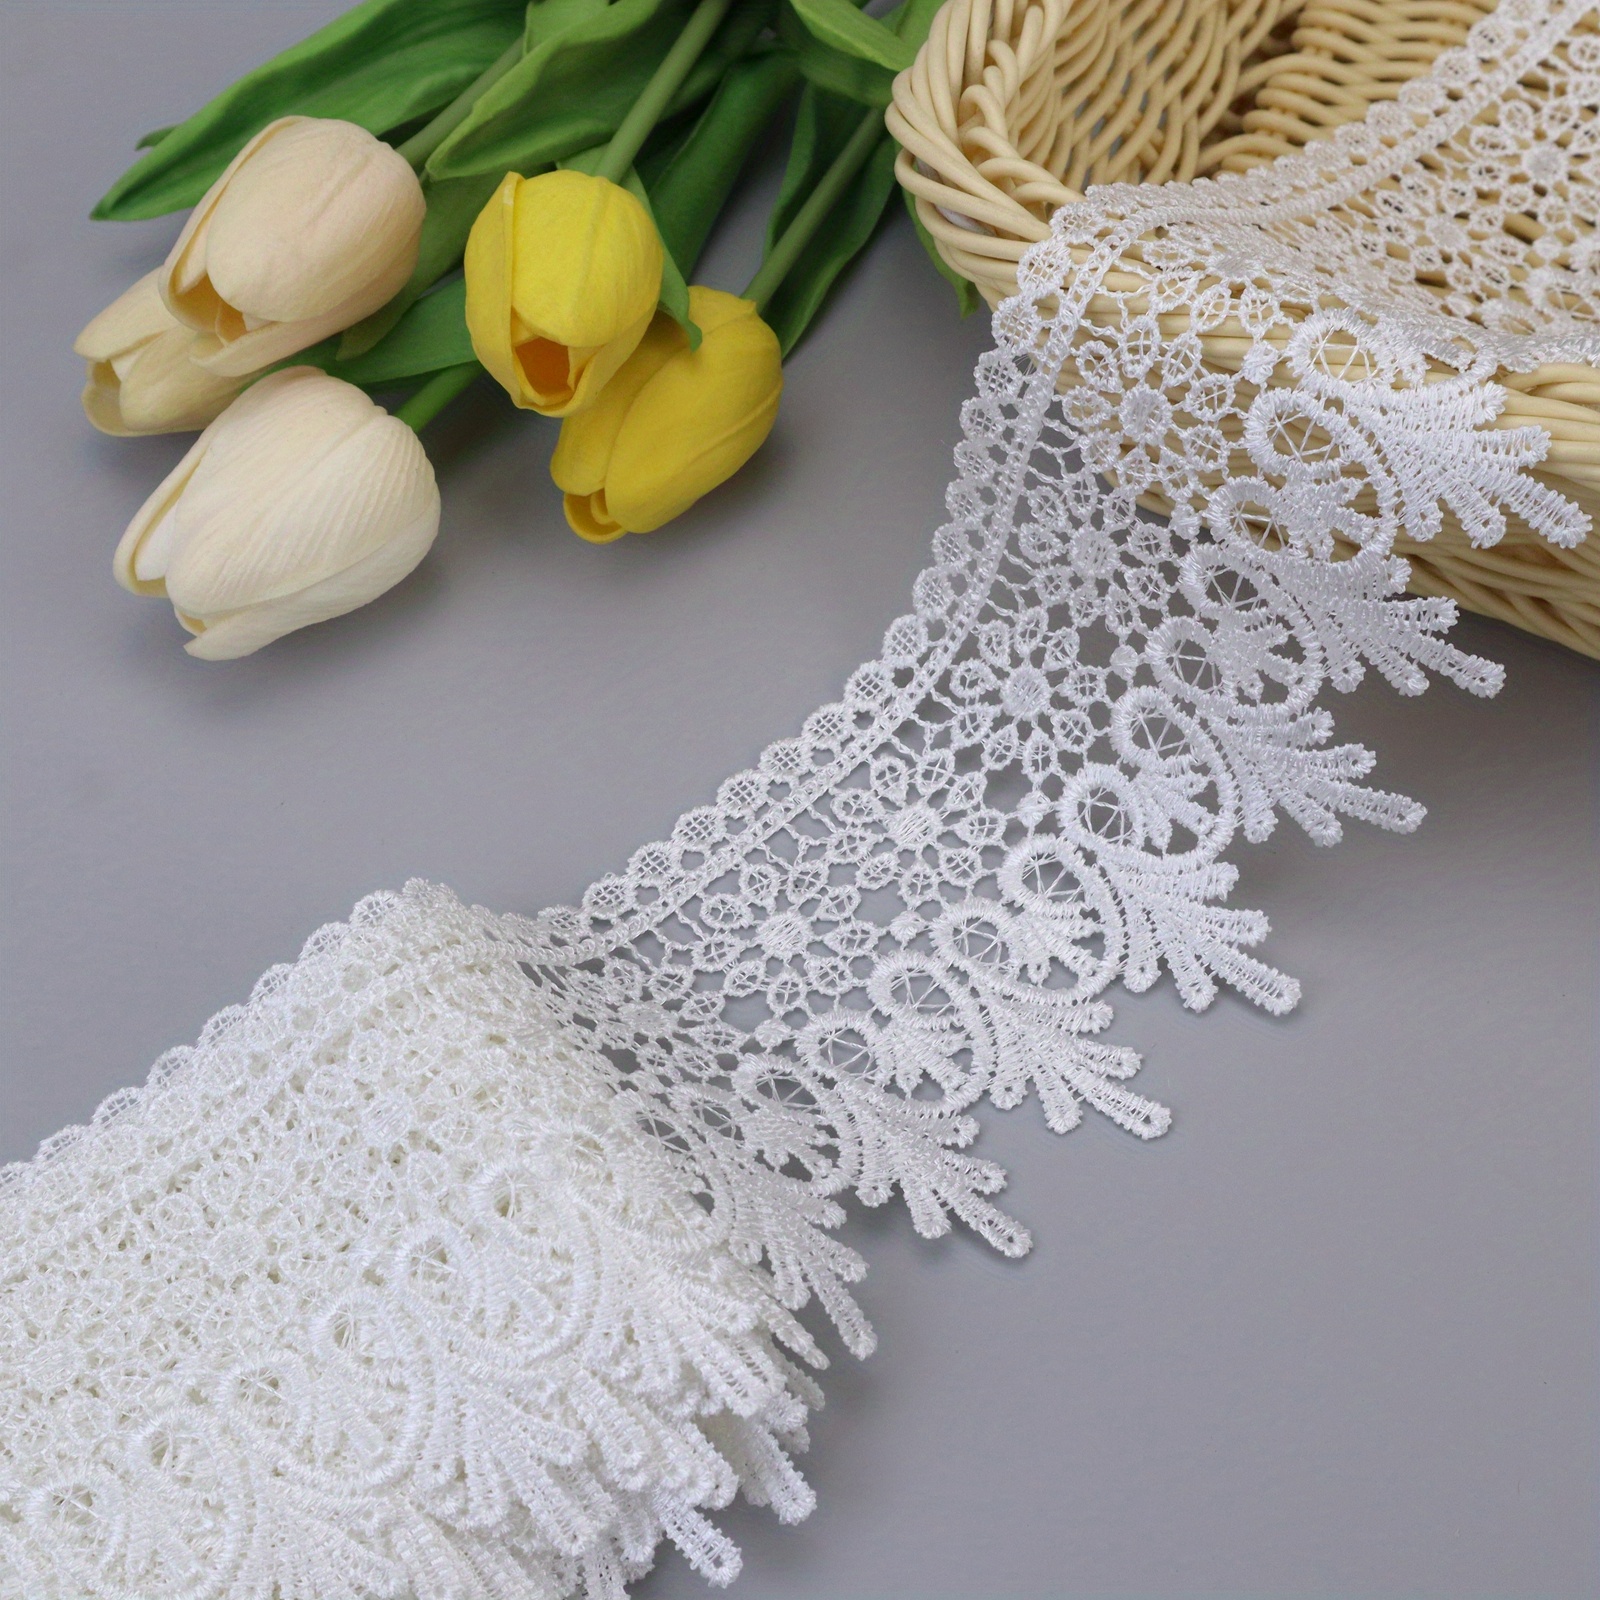 Trims by The Yard Marsilia Embroidered Designer Venice Lace Trim, White (Sold by The Yard)